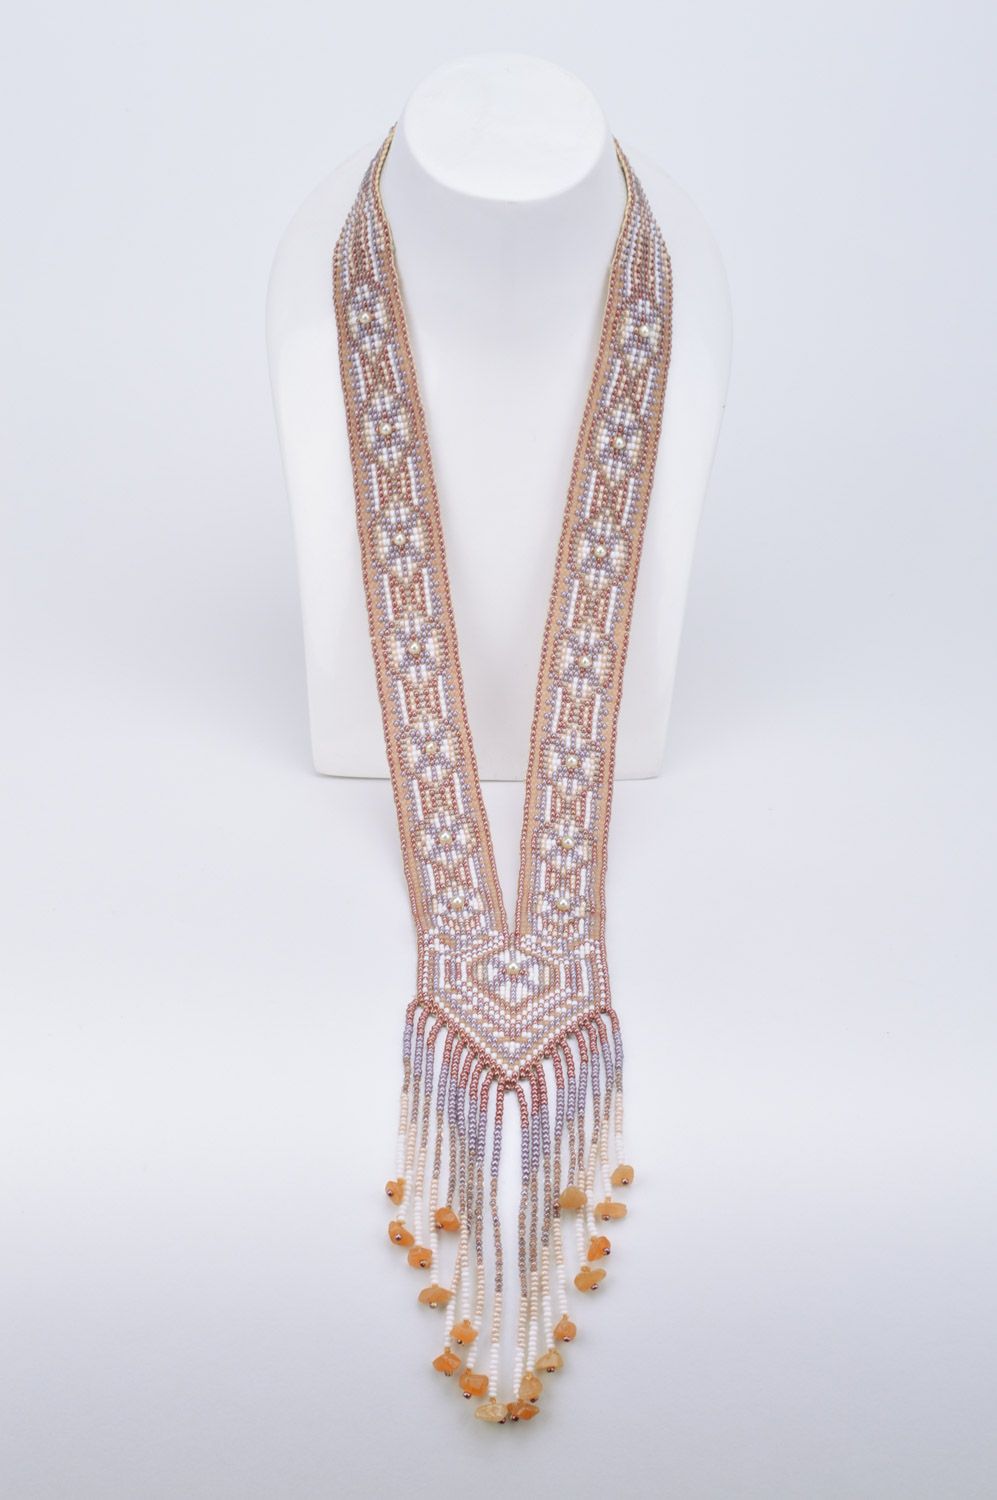 Handmade ethnic necklace woven of Czech beads with fringe in tender color palette photo 3